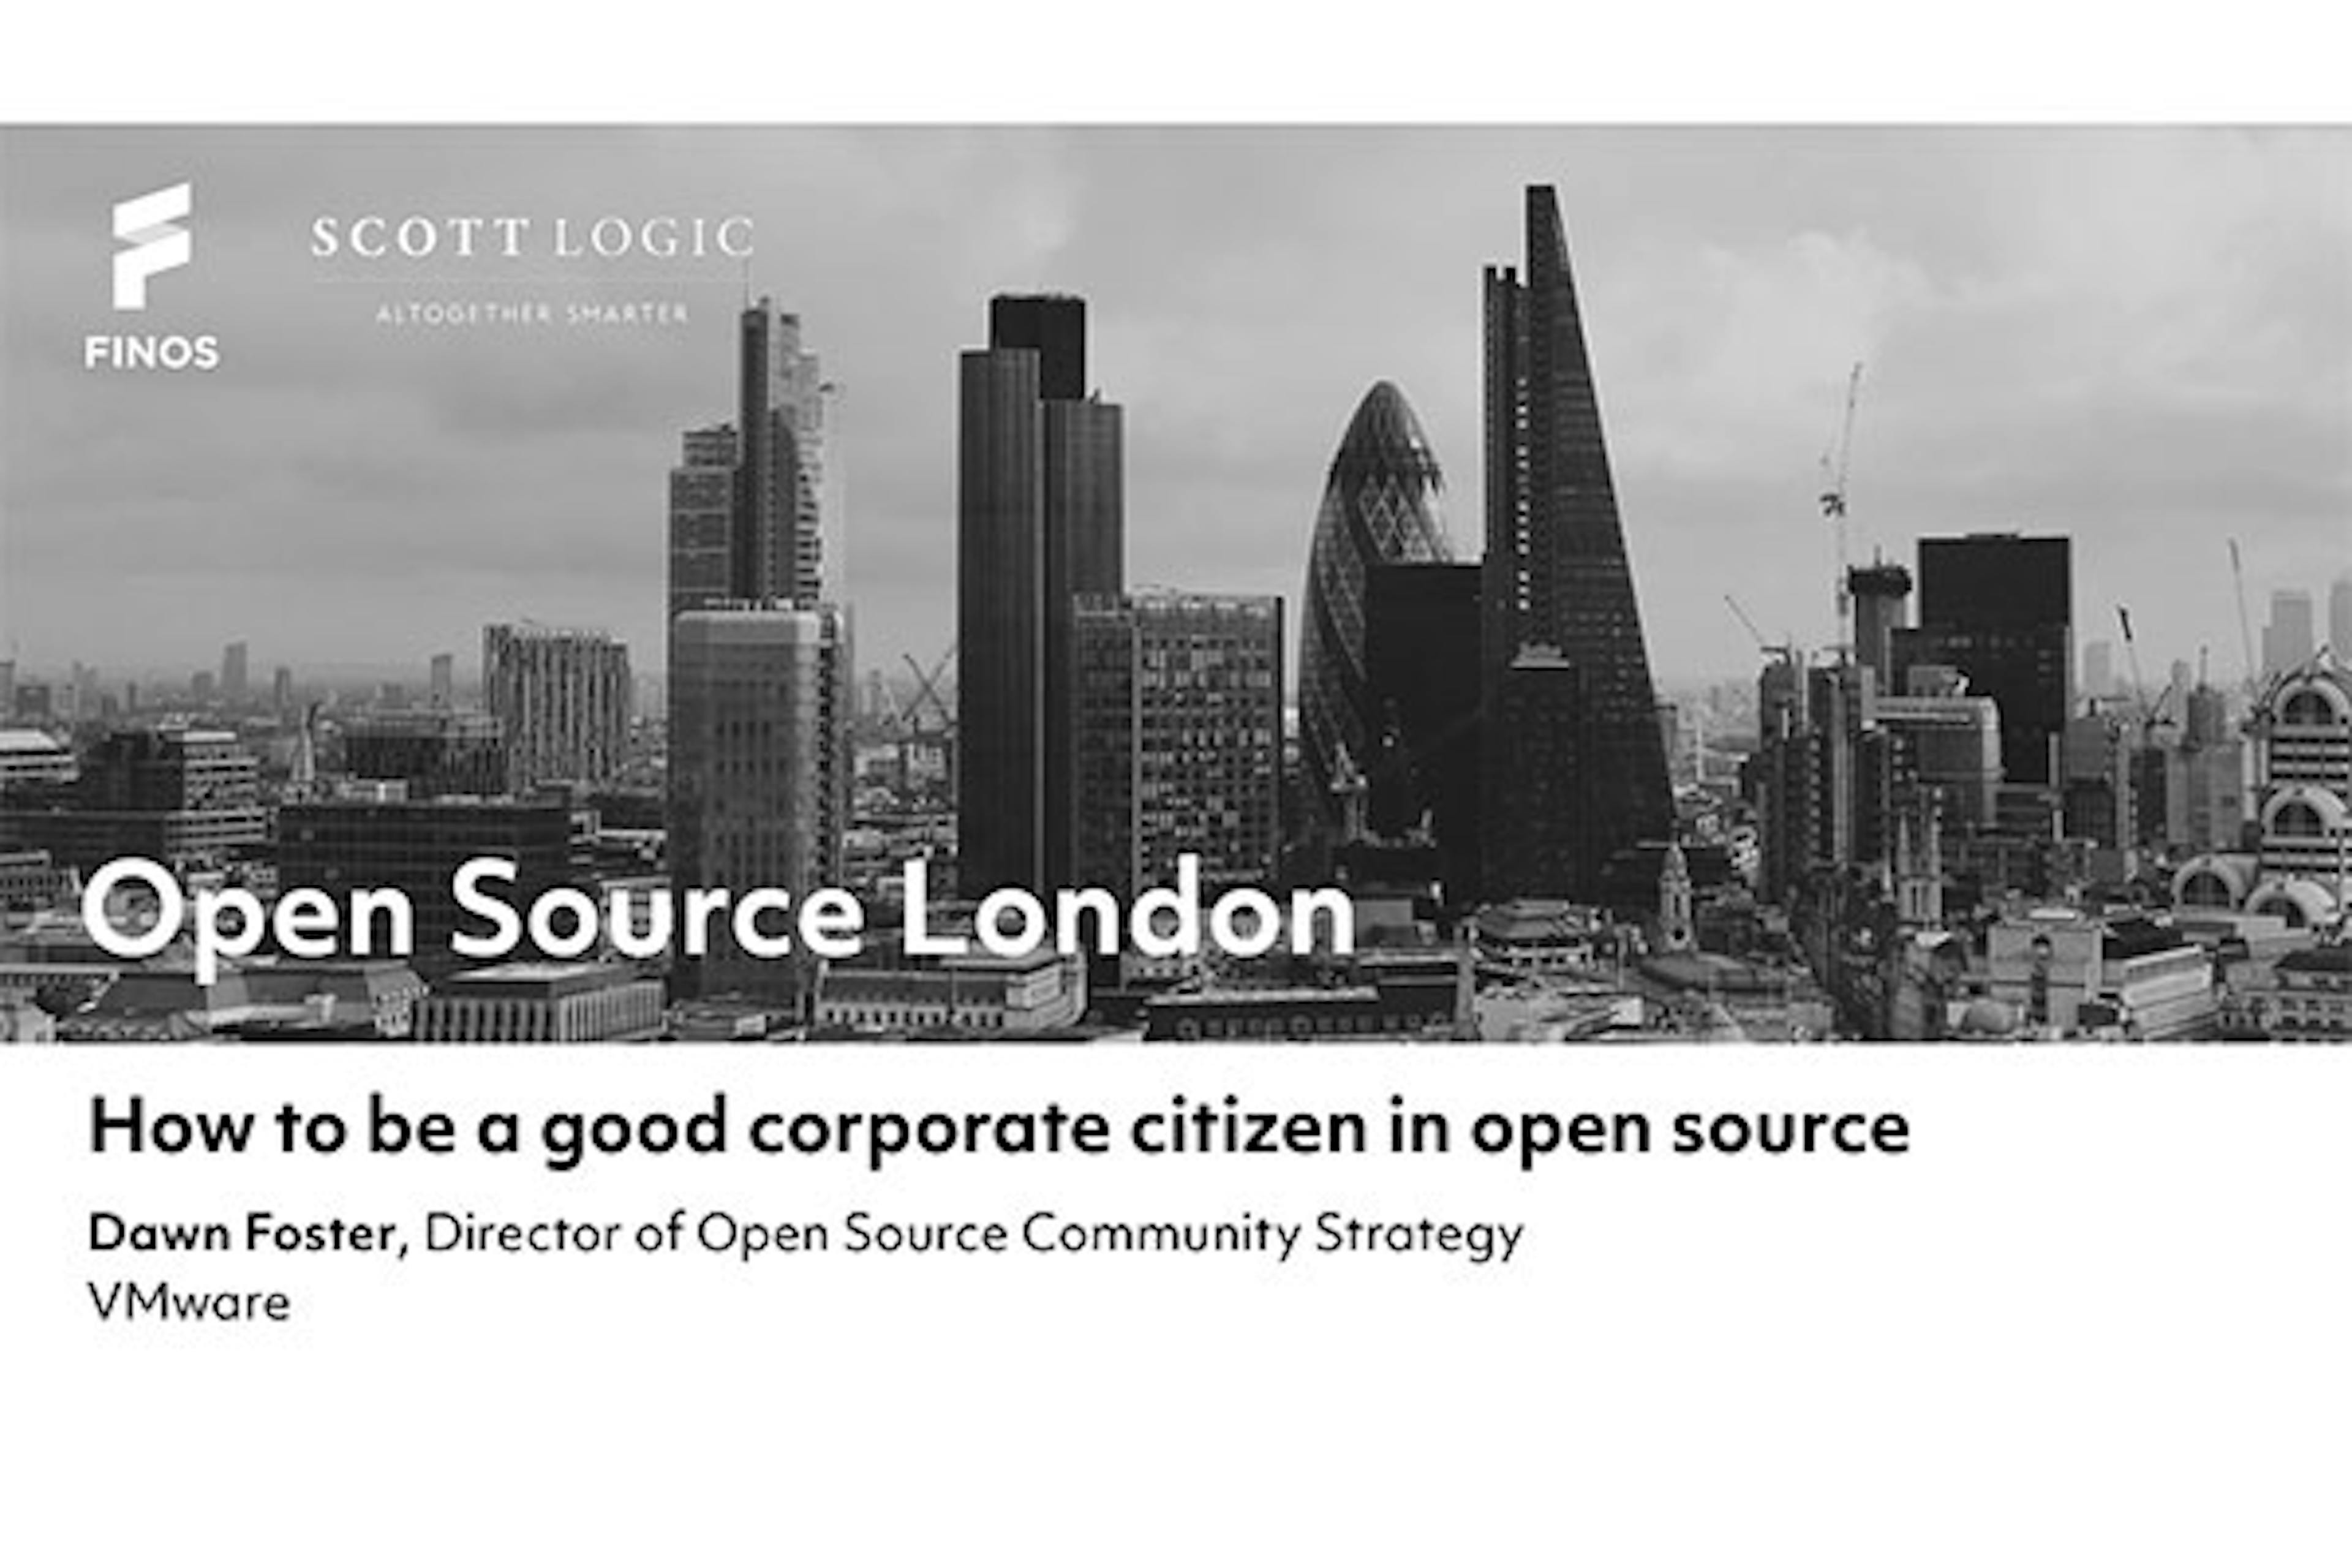 How to be a good corporate citizen in open source